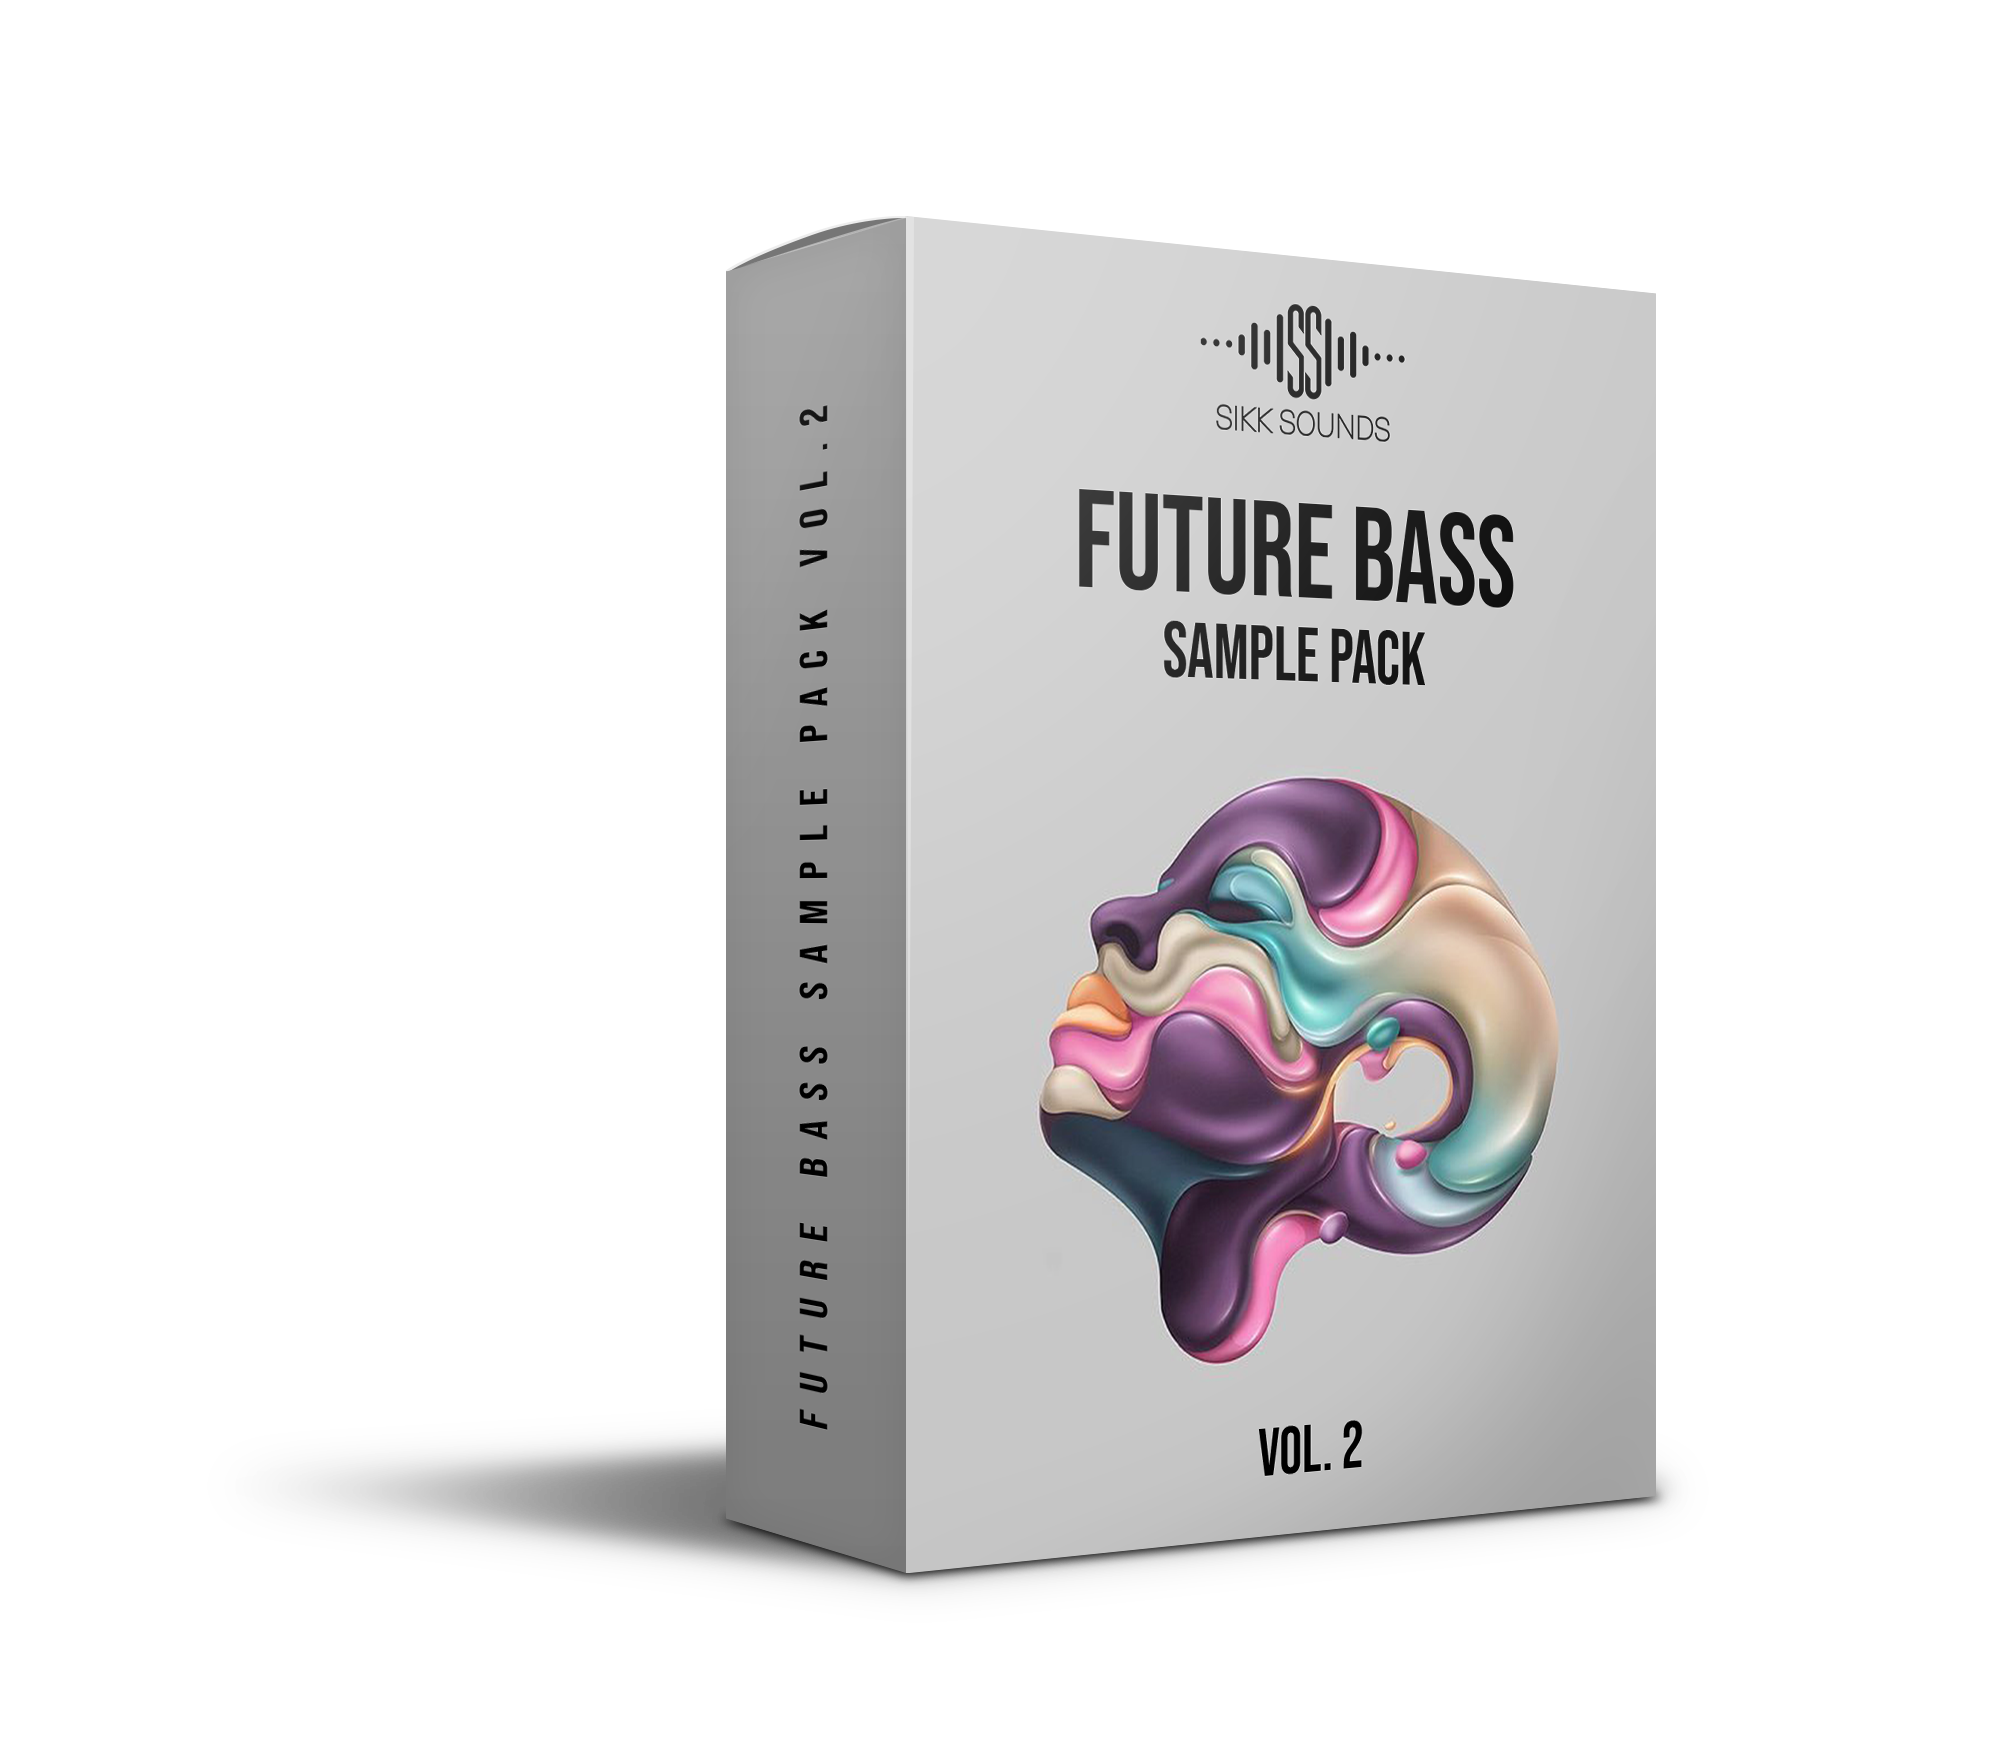 Discover the Essence of Future Bass: Sikk Sounds Future Bass Sample Pack Vol.2